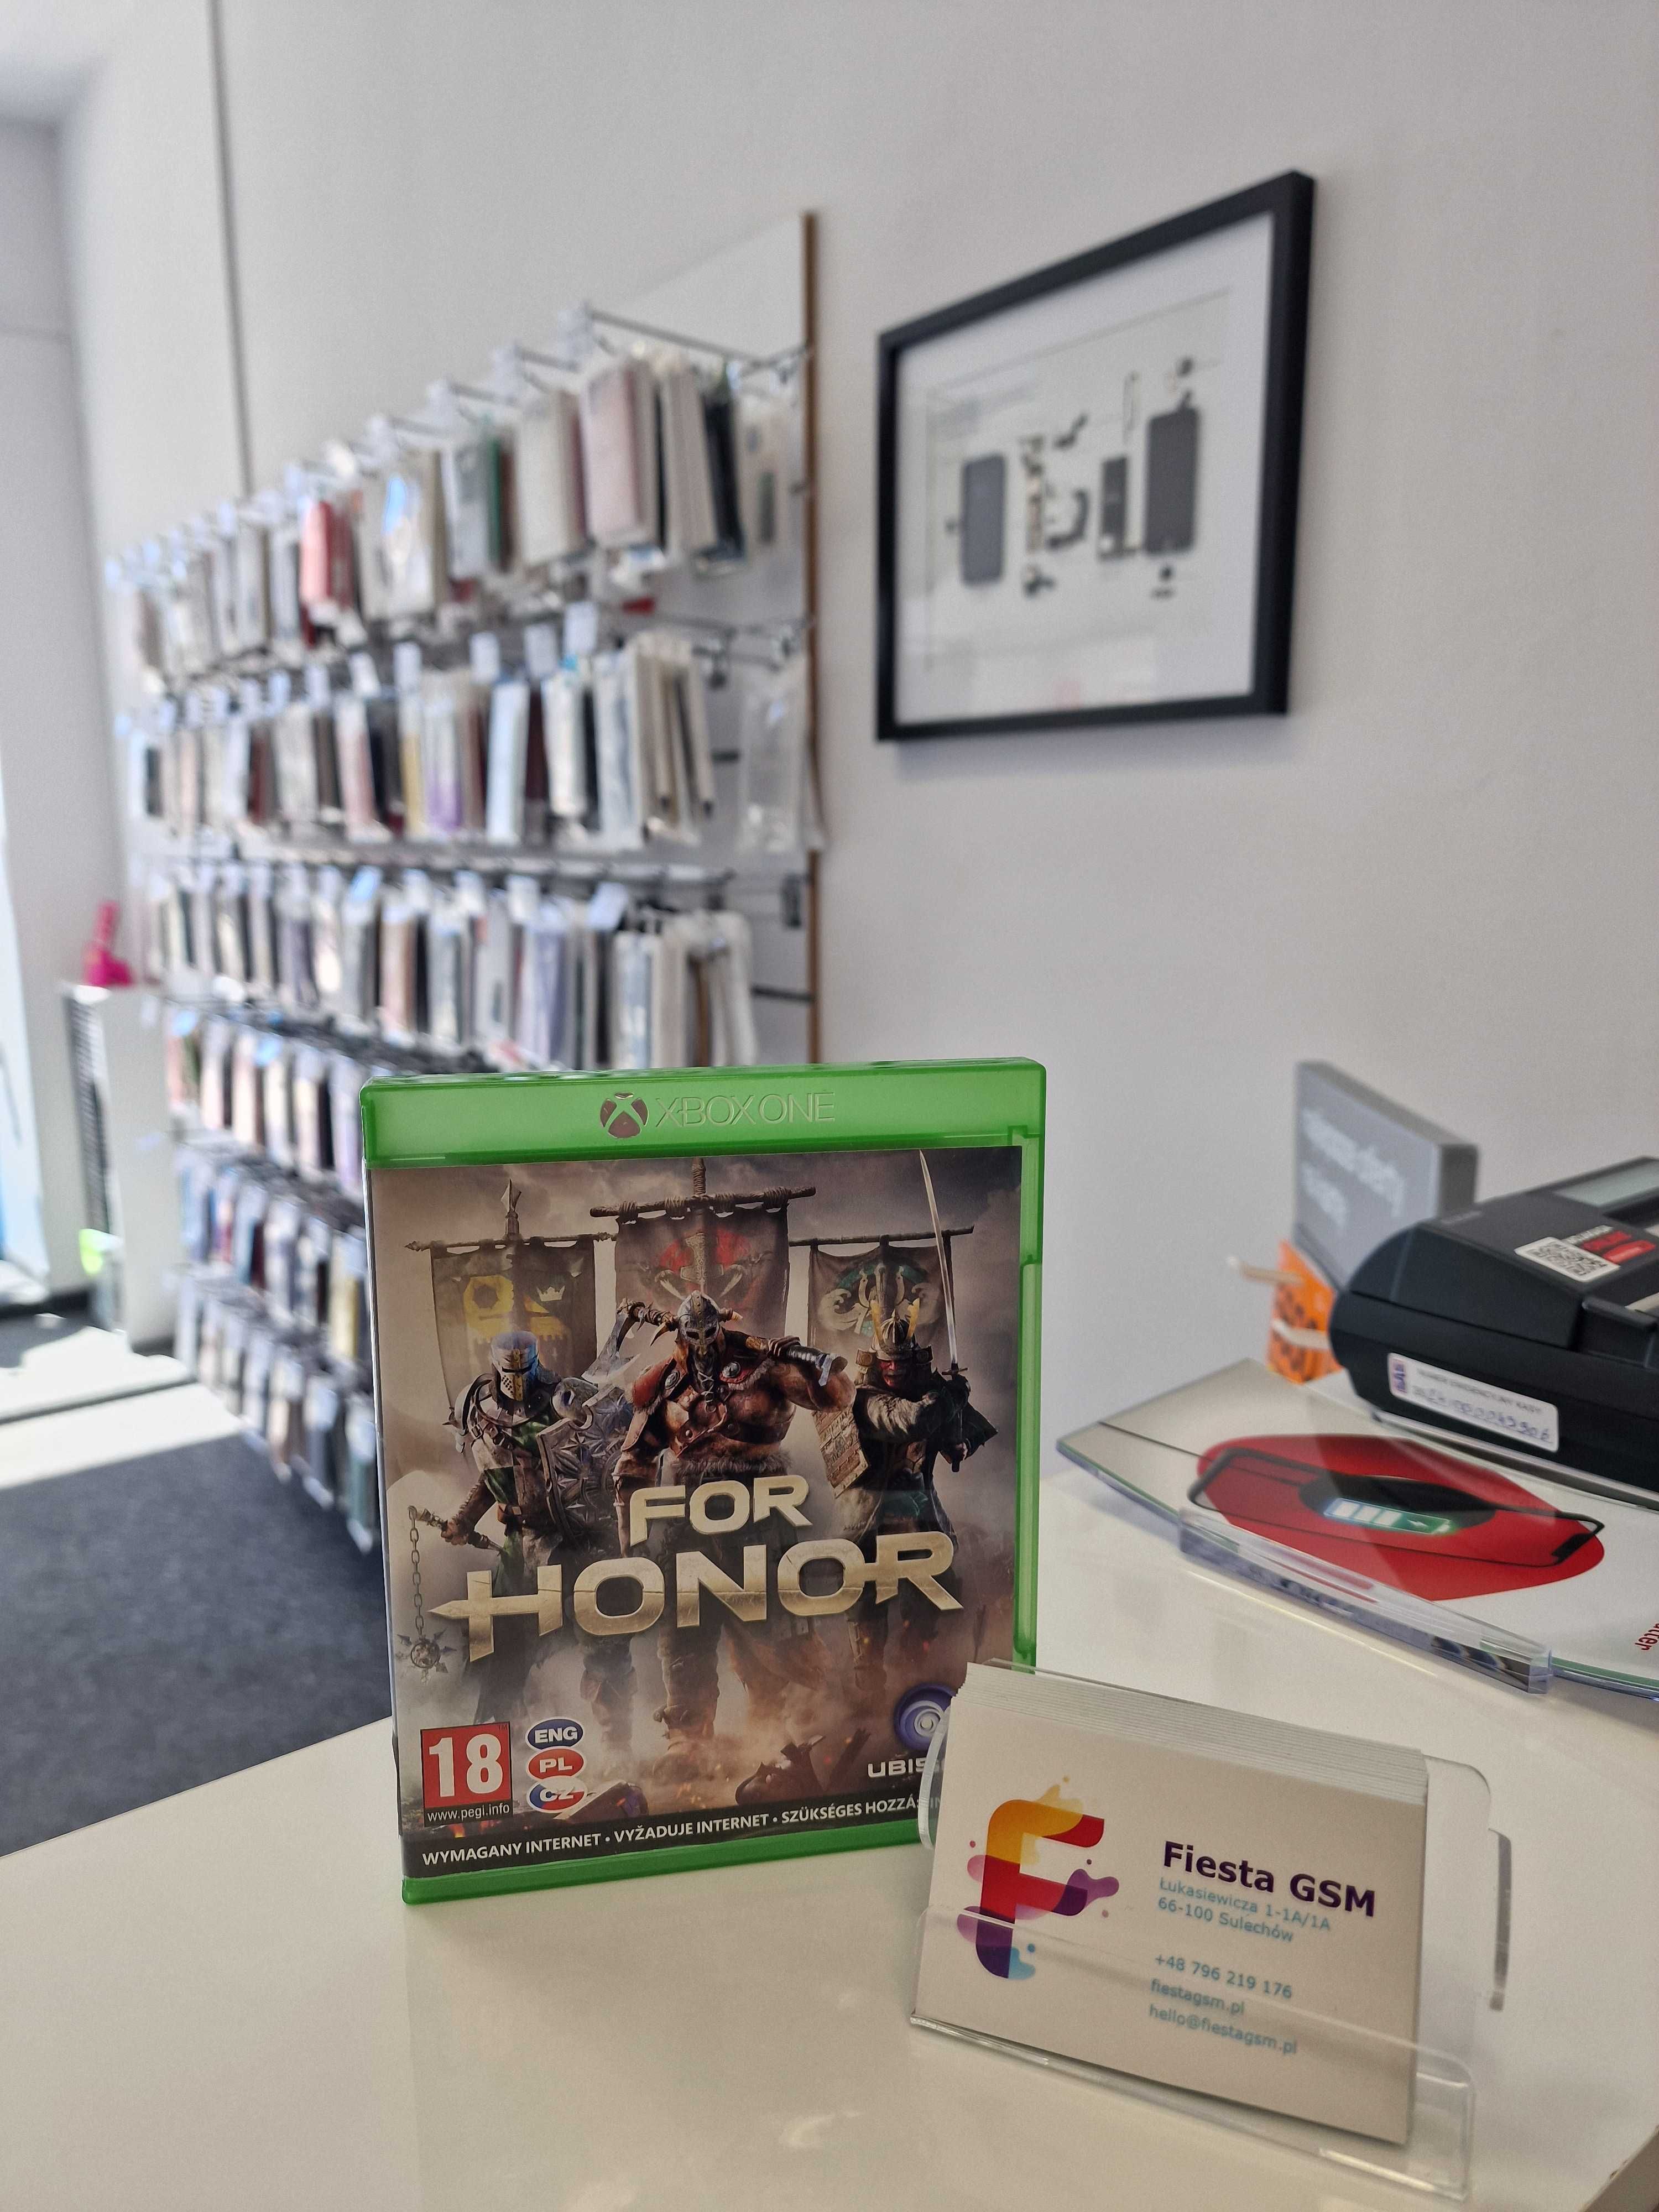 For Honor XboxOne, Fiesta GSM Sulechów